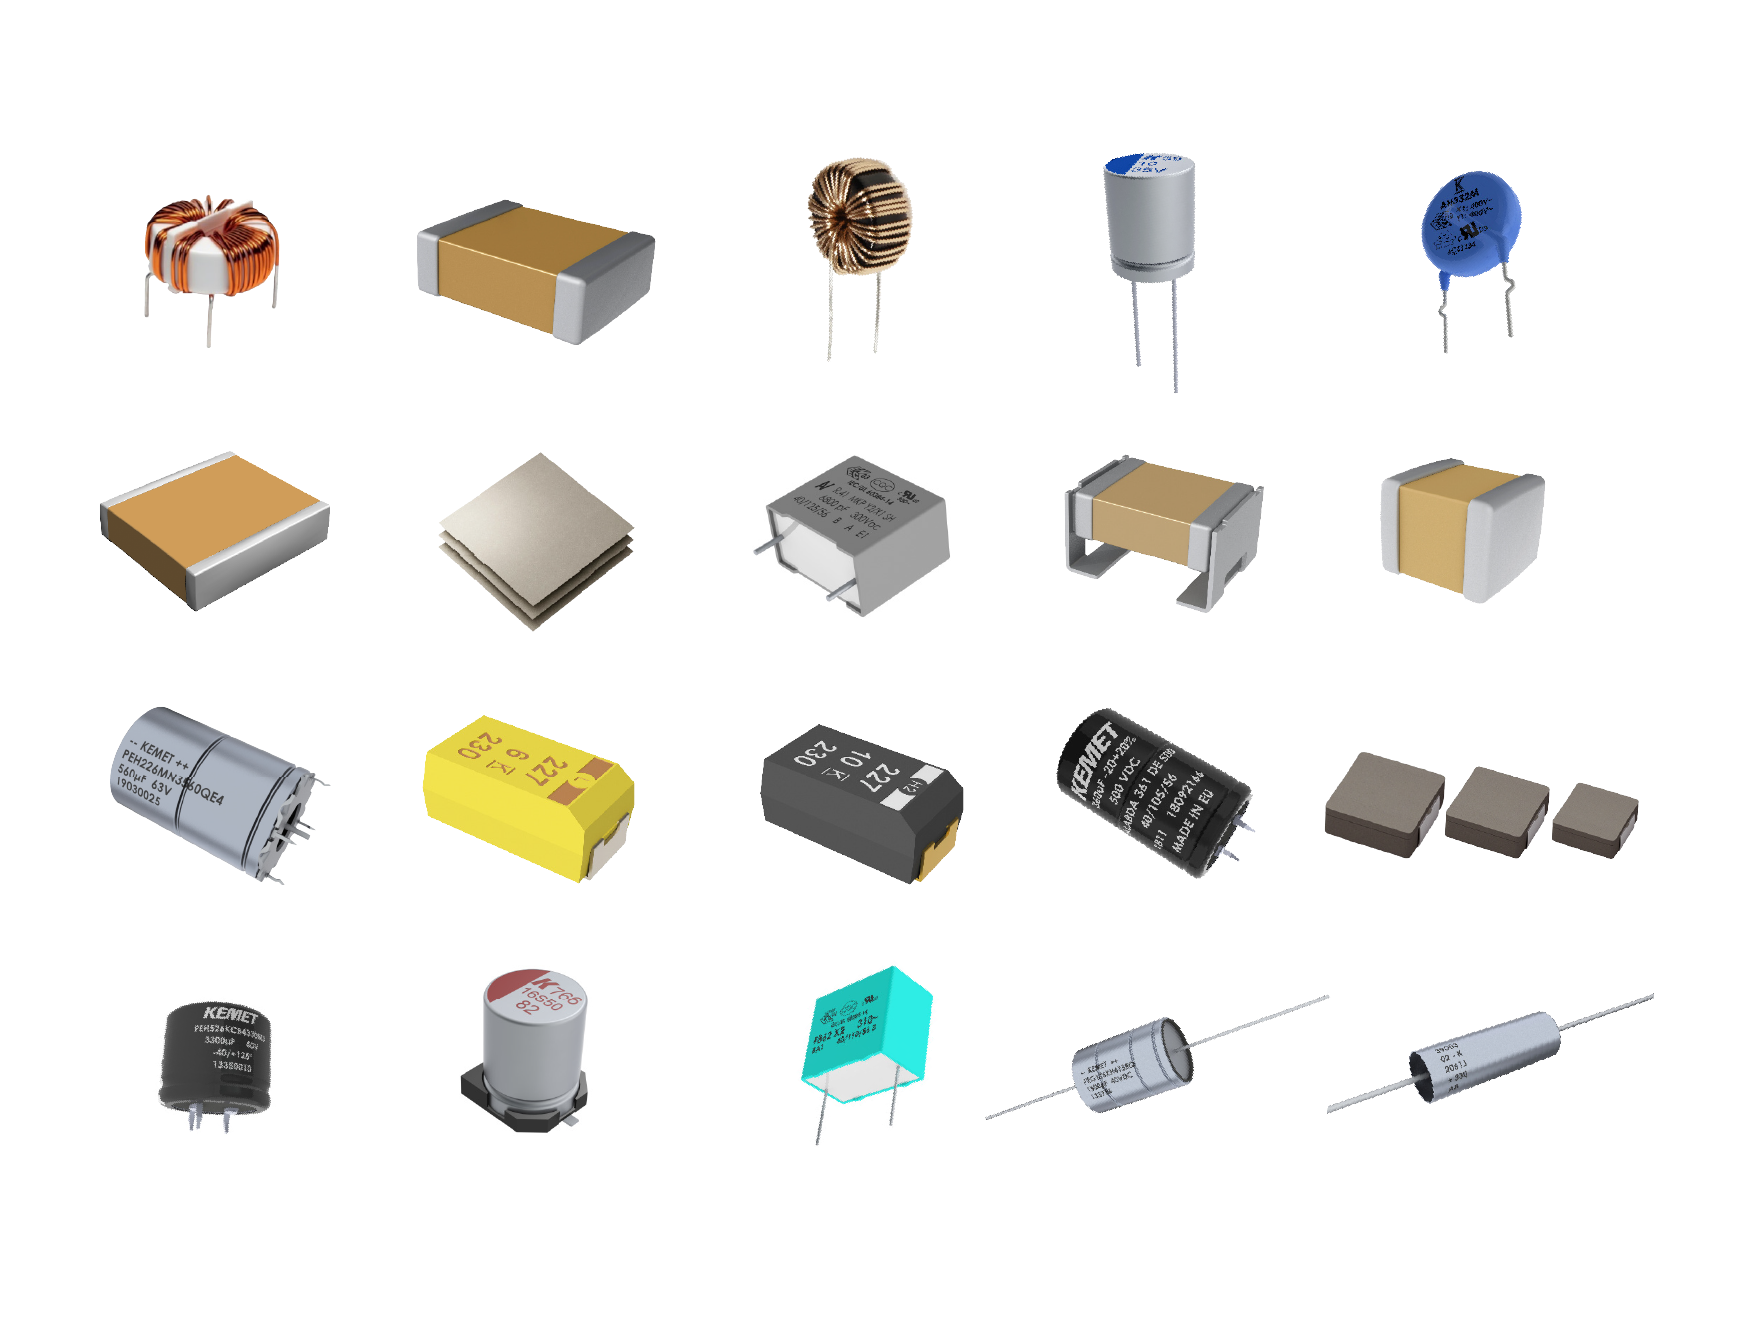 Grid of images of KEMETs products